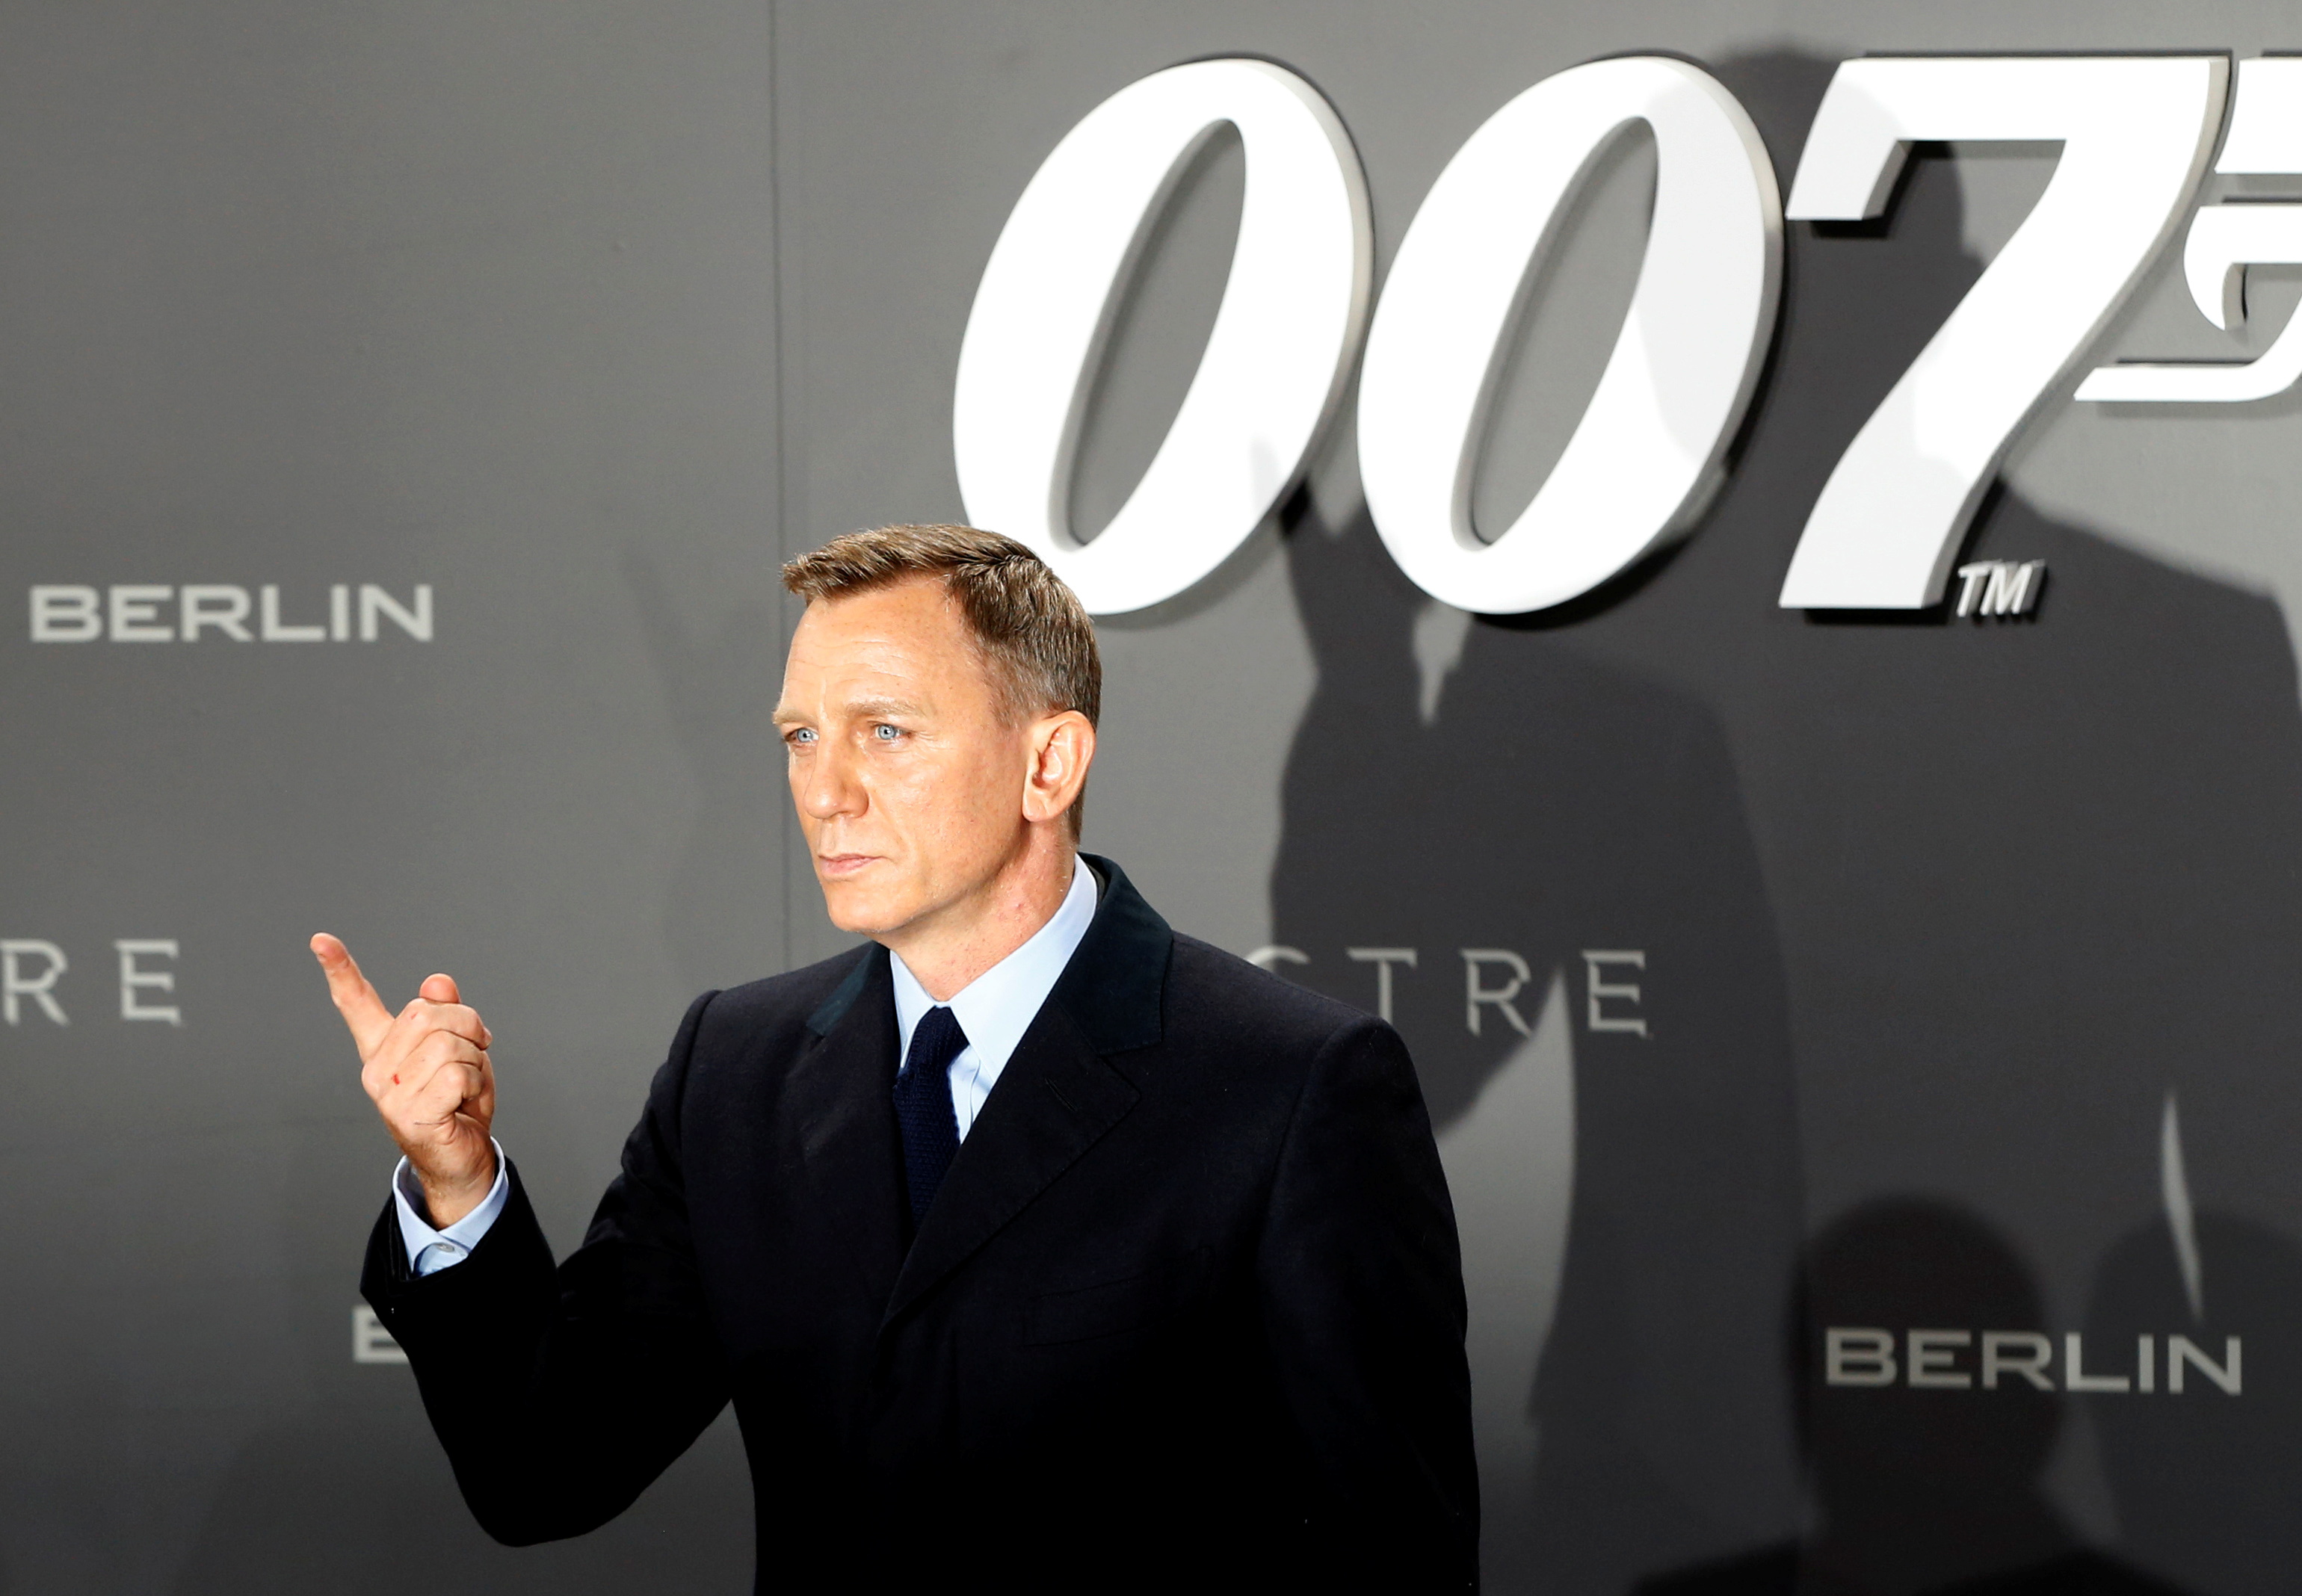 Actor Craig poses for photographers on the red carpet at the German premiere of the new James Bond 007 film 